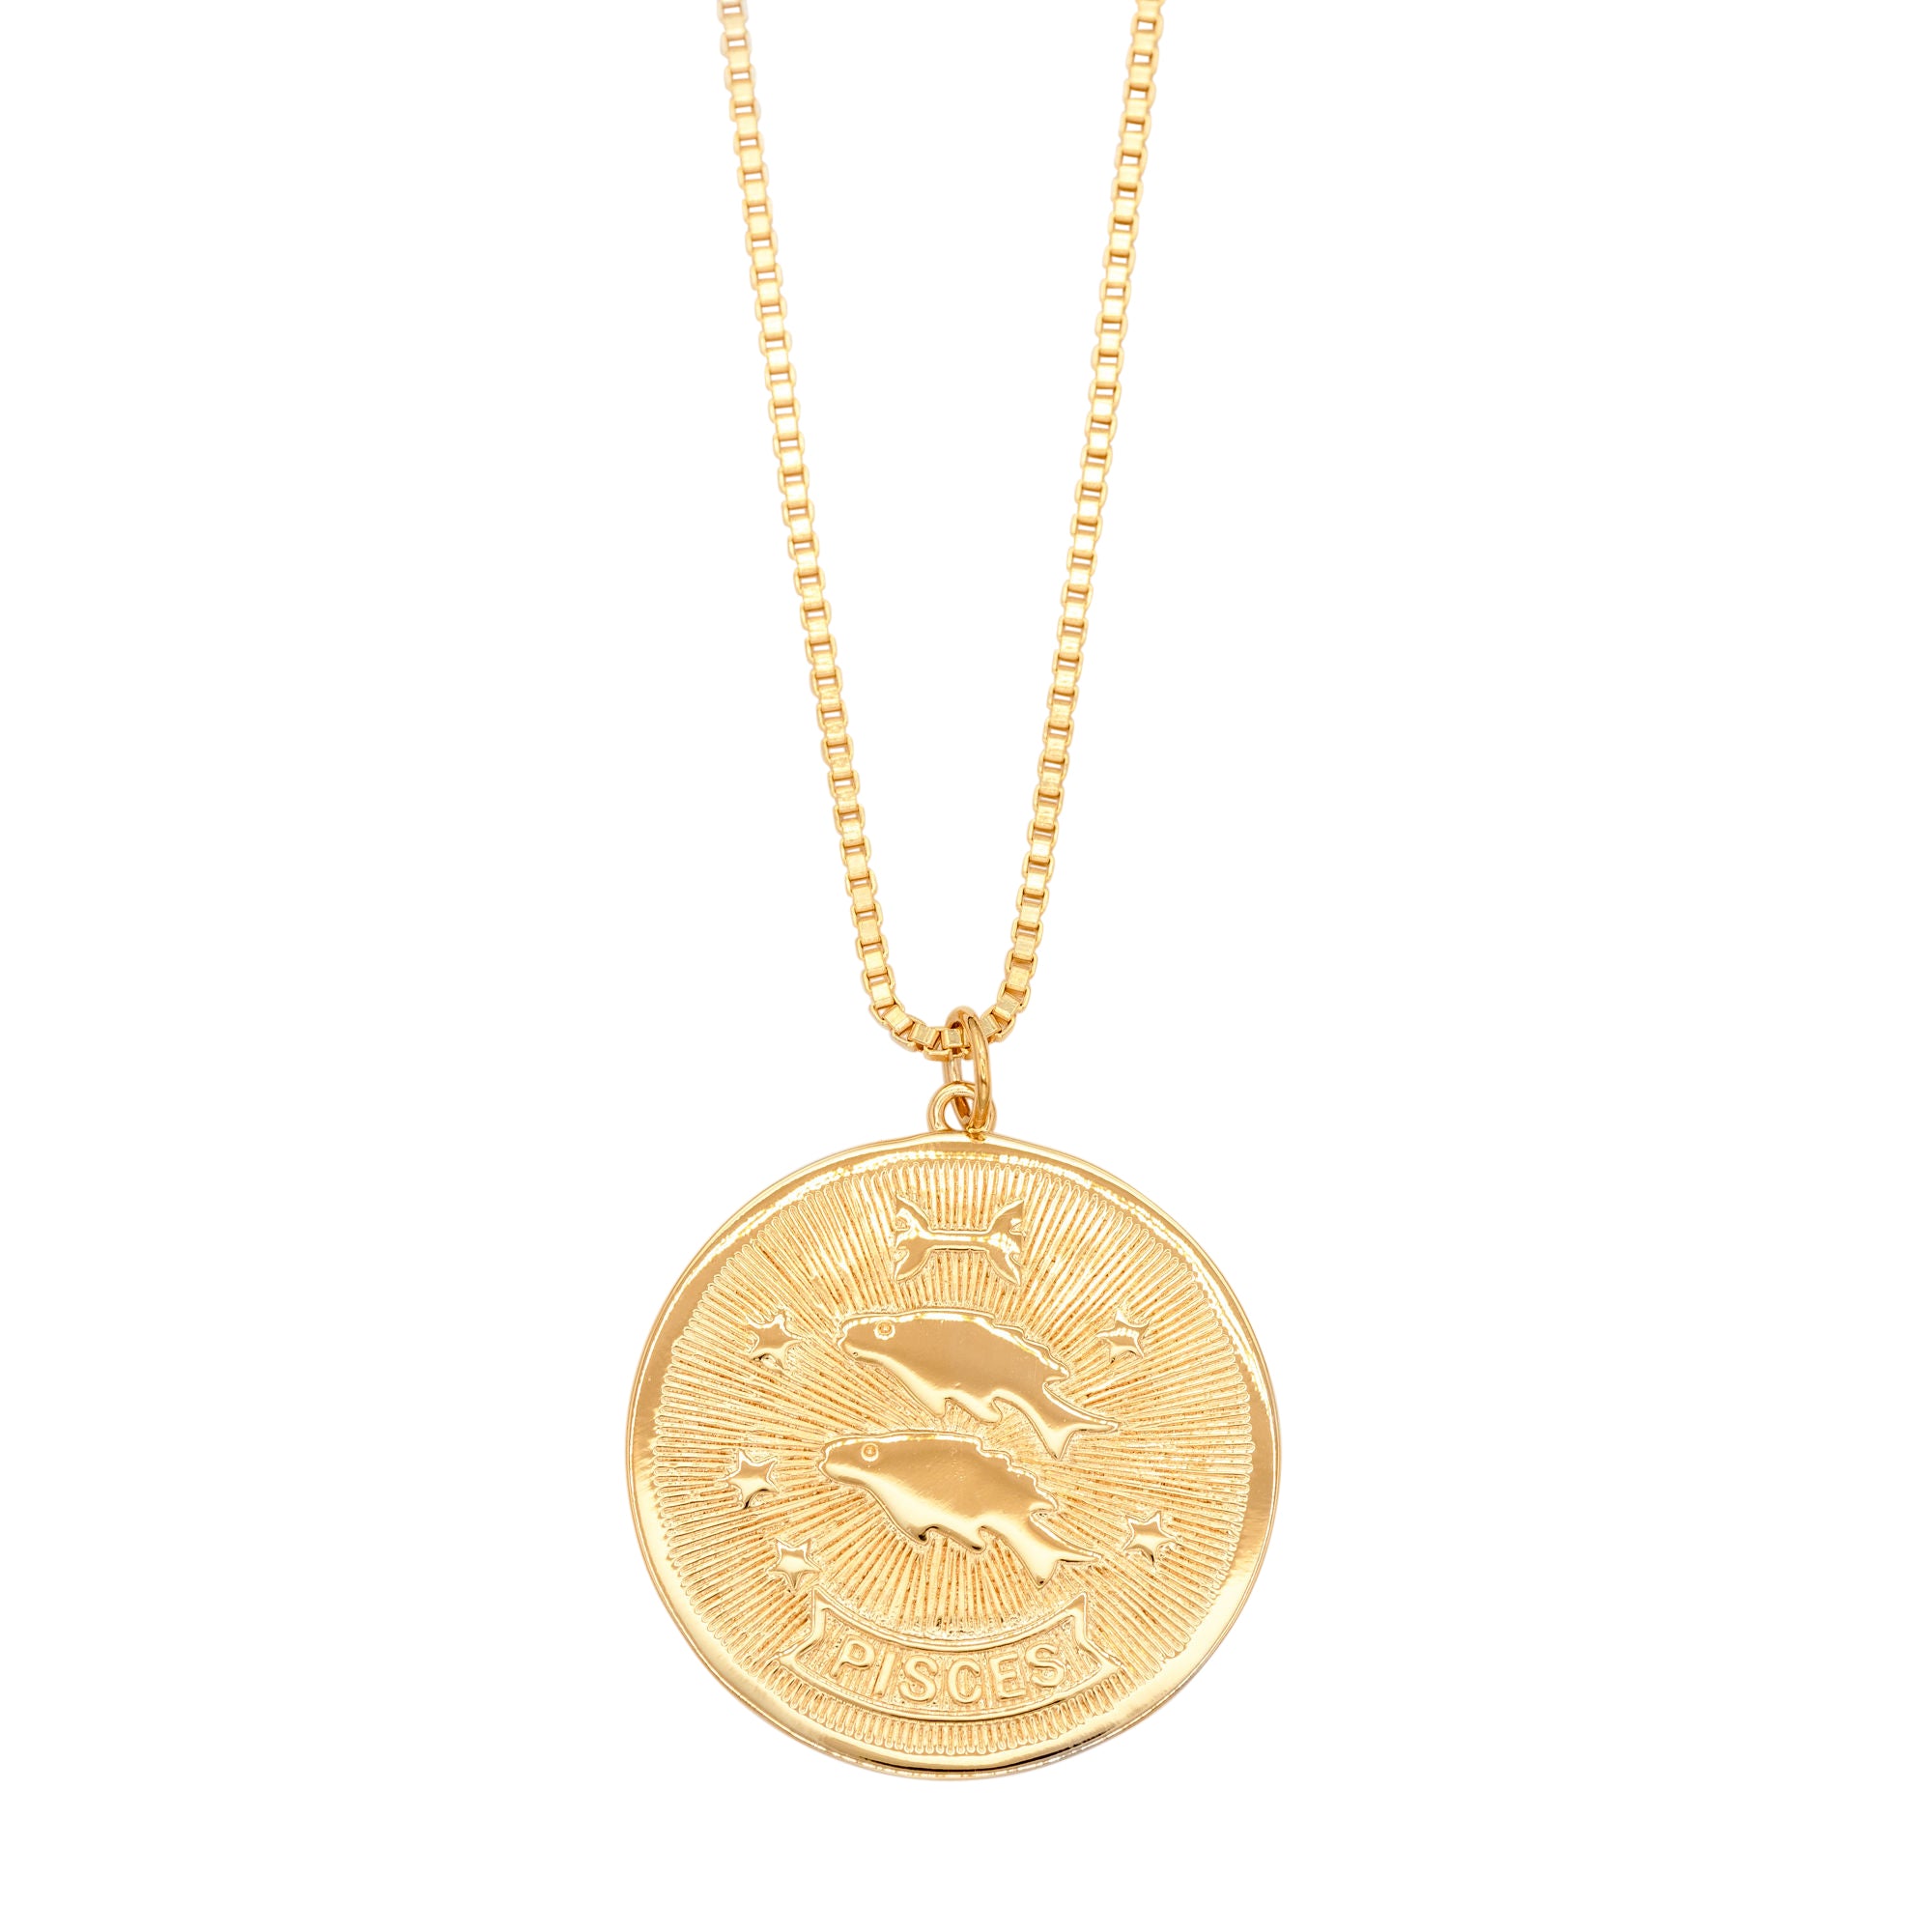 Zodiac Medallion Necklace- Pisces by Erin Fader Jewelry